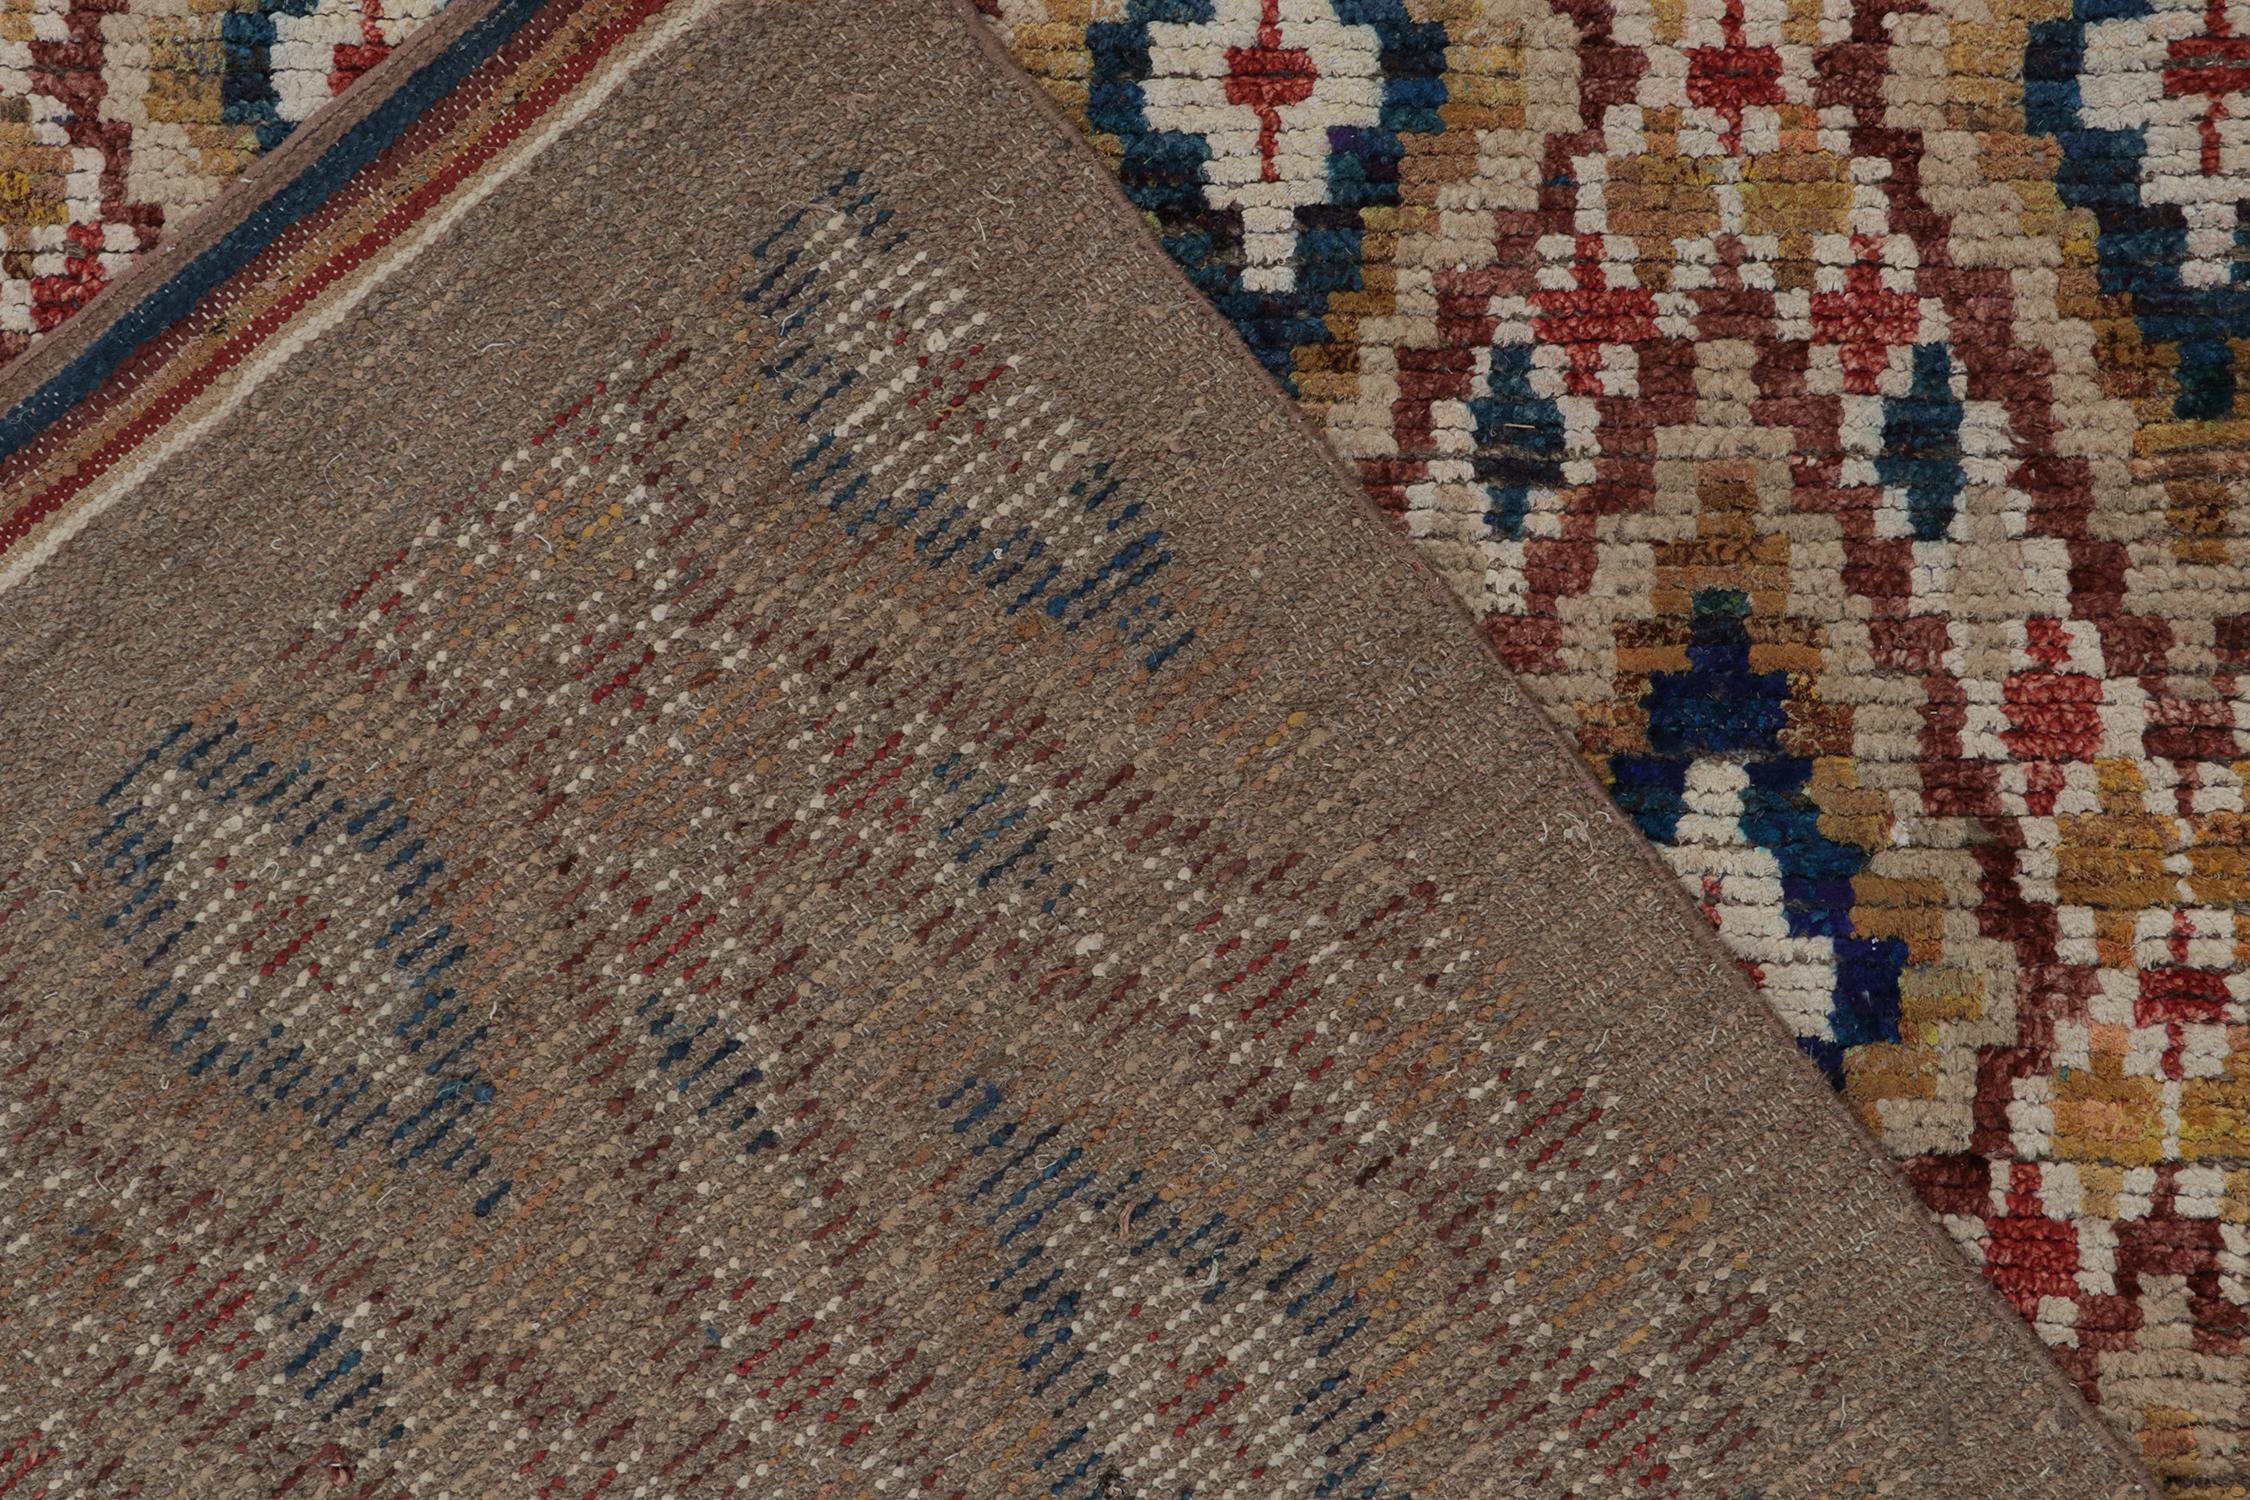 Wool Rug & Kilim’s Moroccan style rug in Brown, Red and Blue Diamond Patterns For Sale